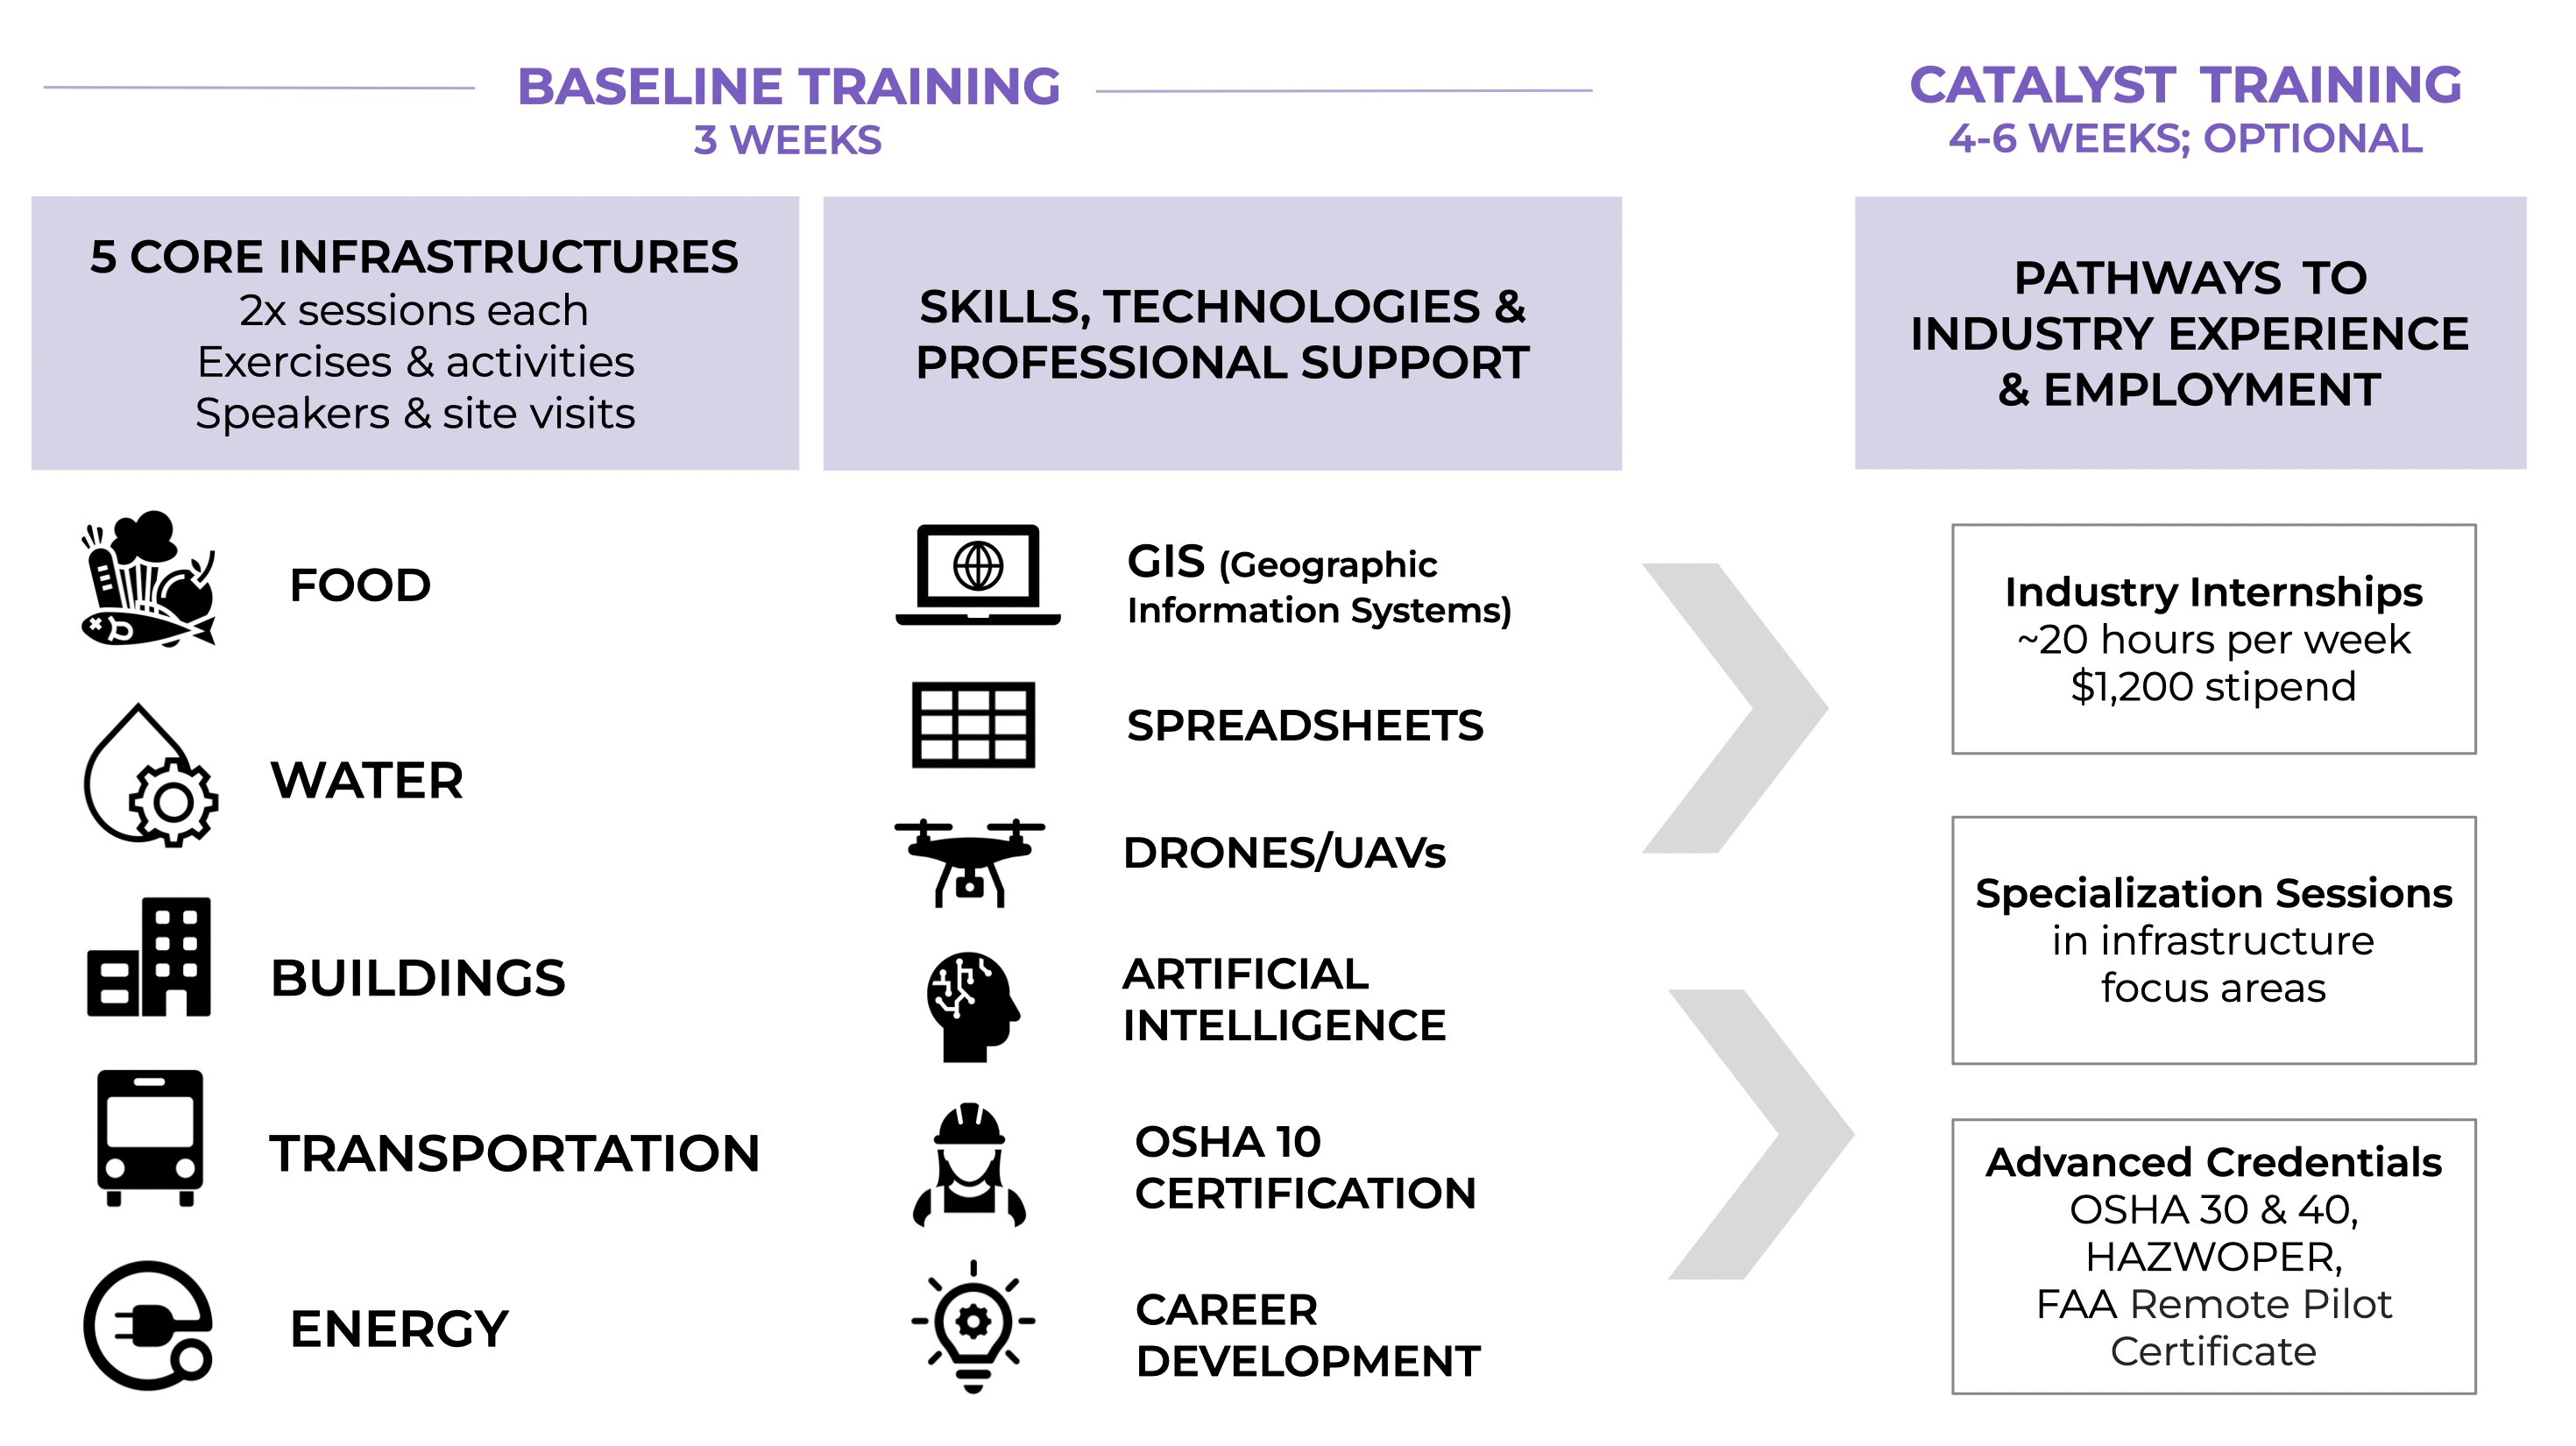 Diagram showing the RIWI program, including Baseline and Catalyst Training phases.